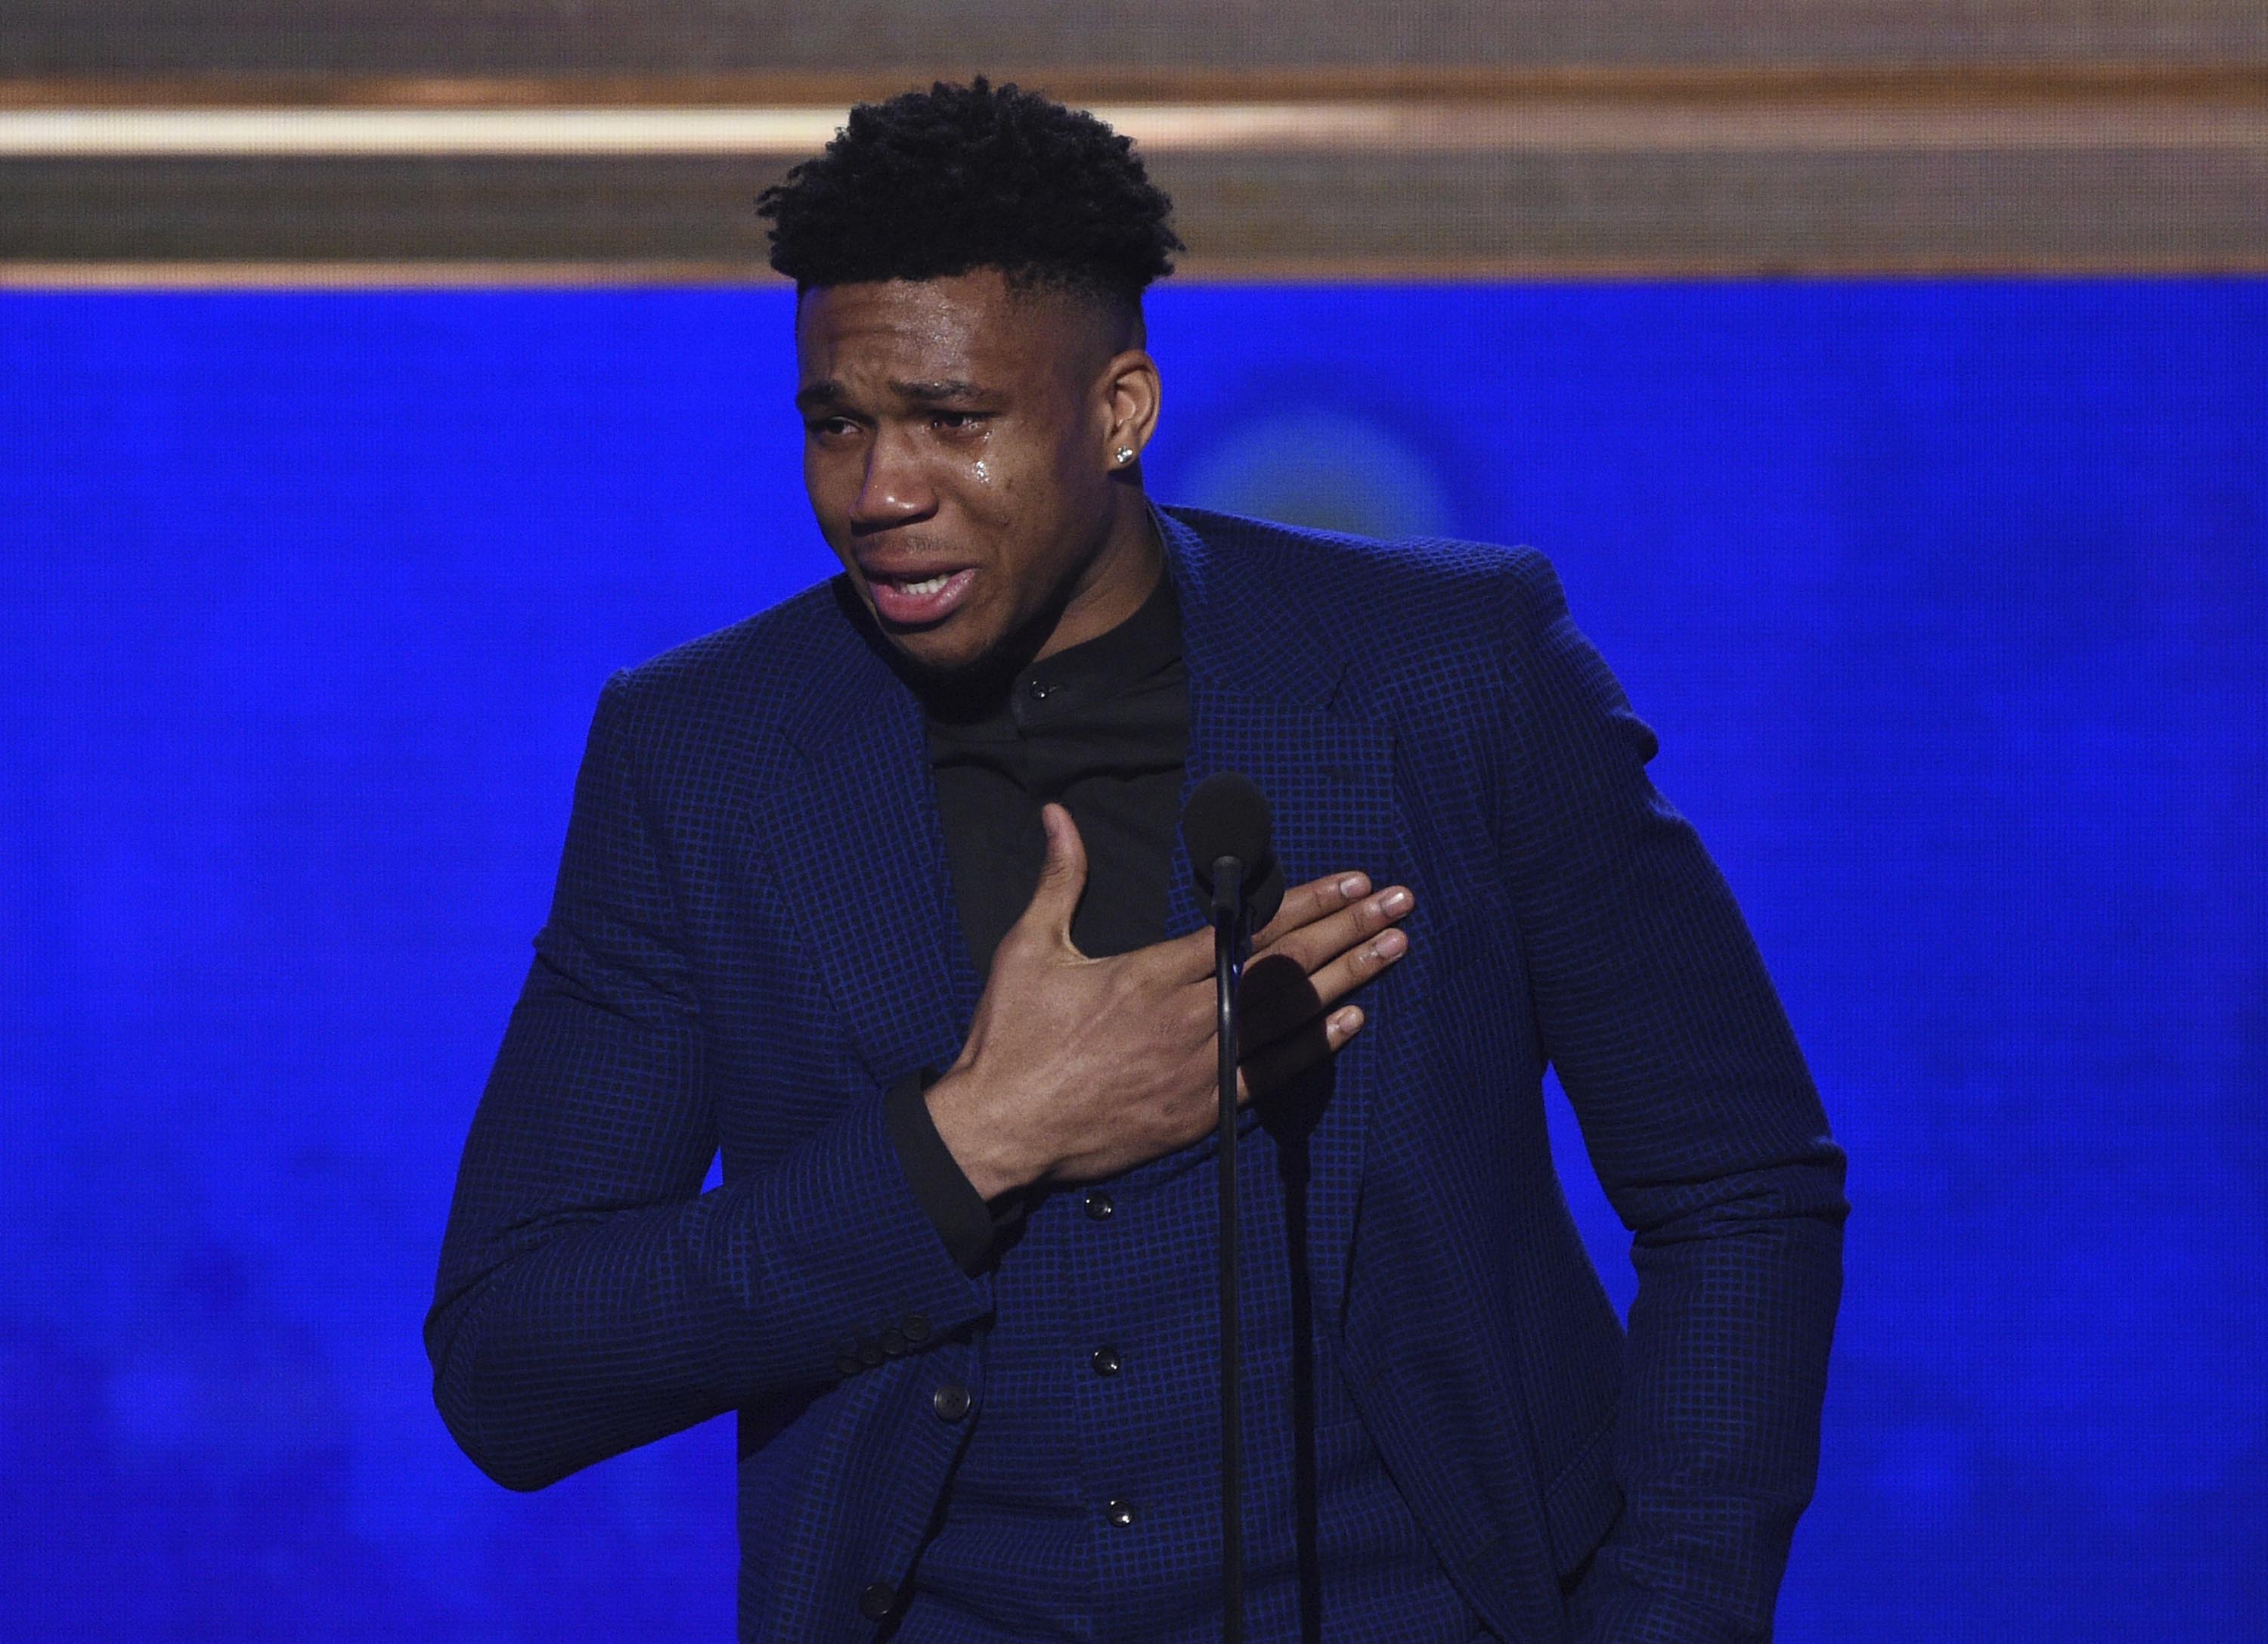 NBA player Giannis Antetokounmpo, of the Milwaukee Bucks, reacts as he accepts the most valuable player award at the NBA Awards on Monday, June 24, 2019, at the Barker Hangar in Santa Monica, California. Photo: AP